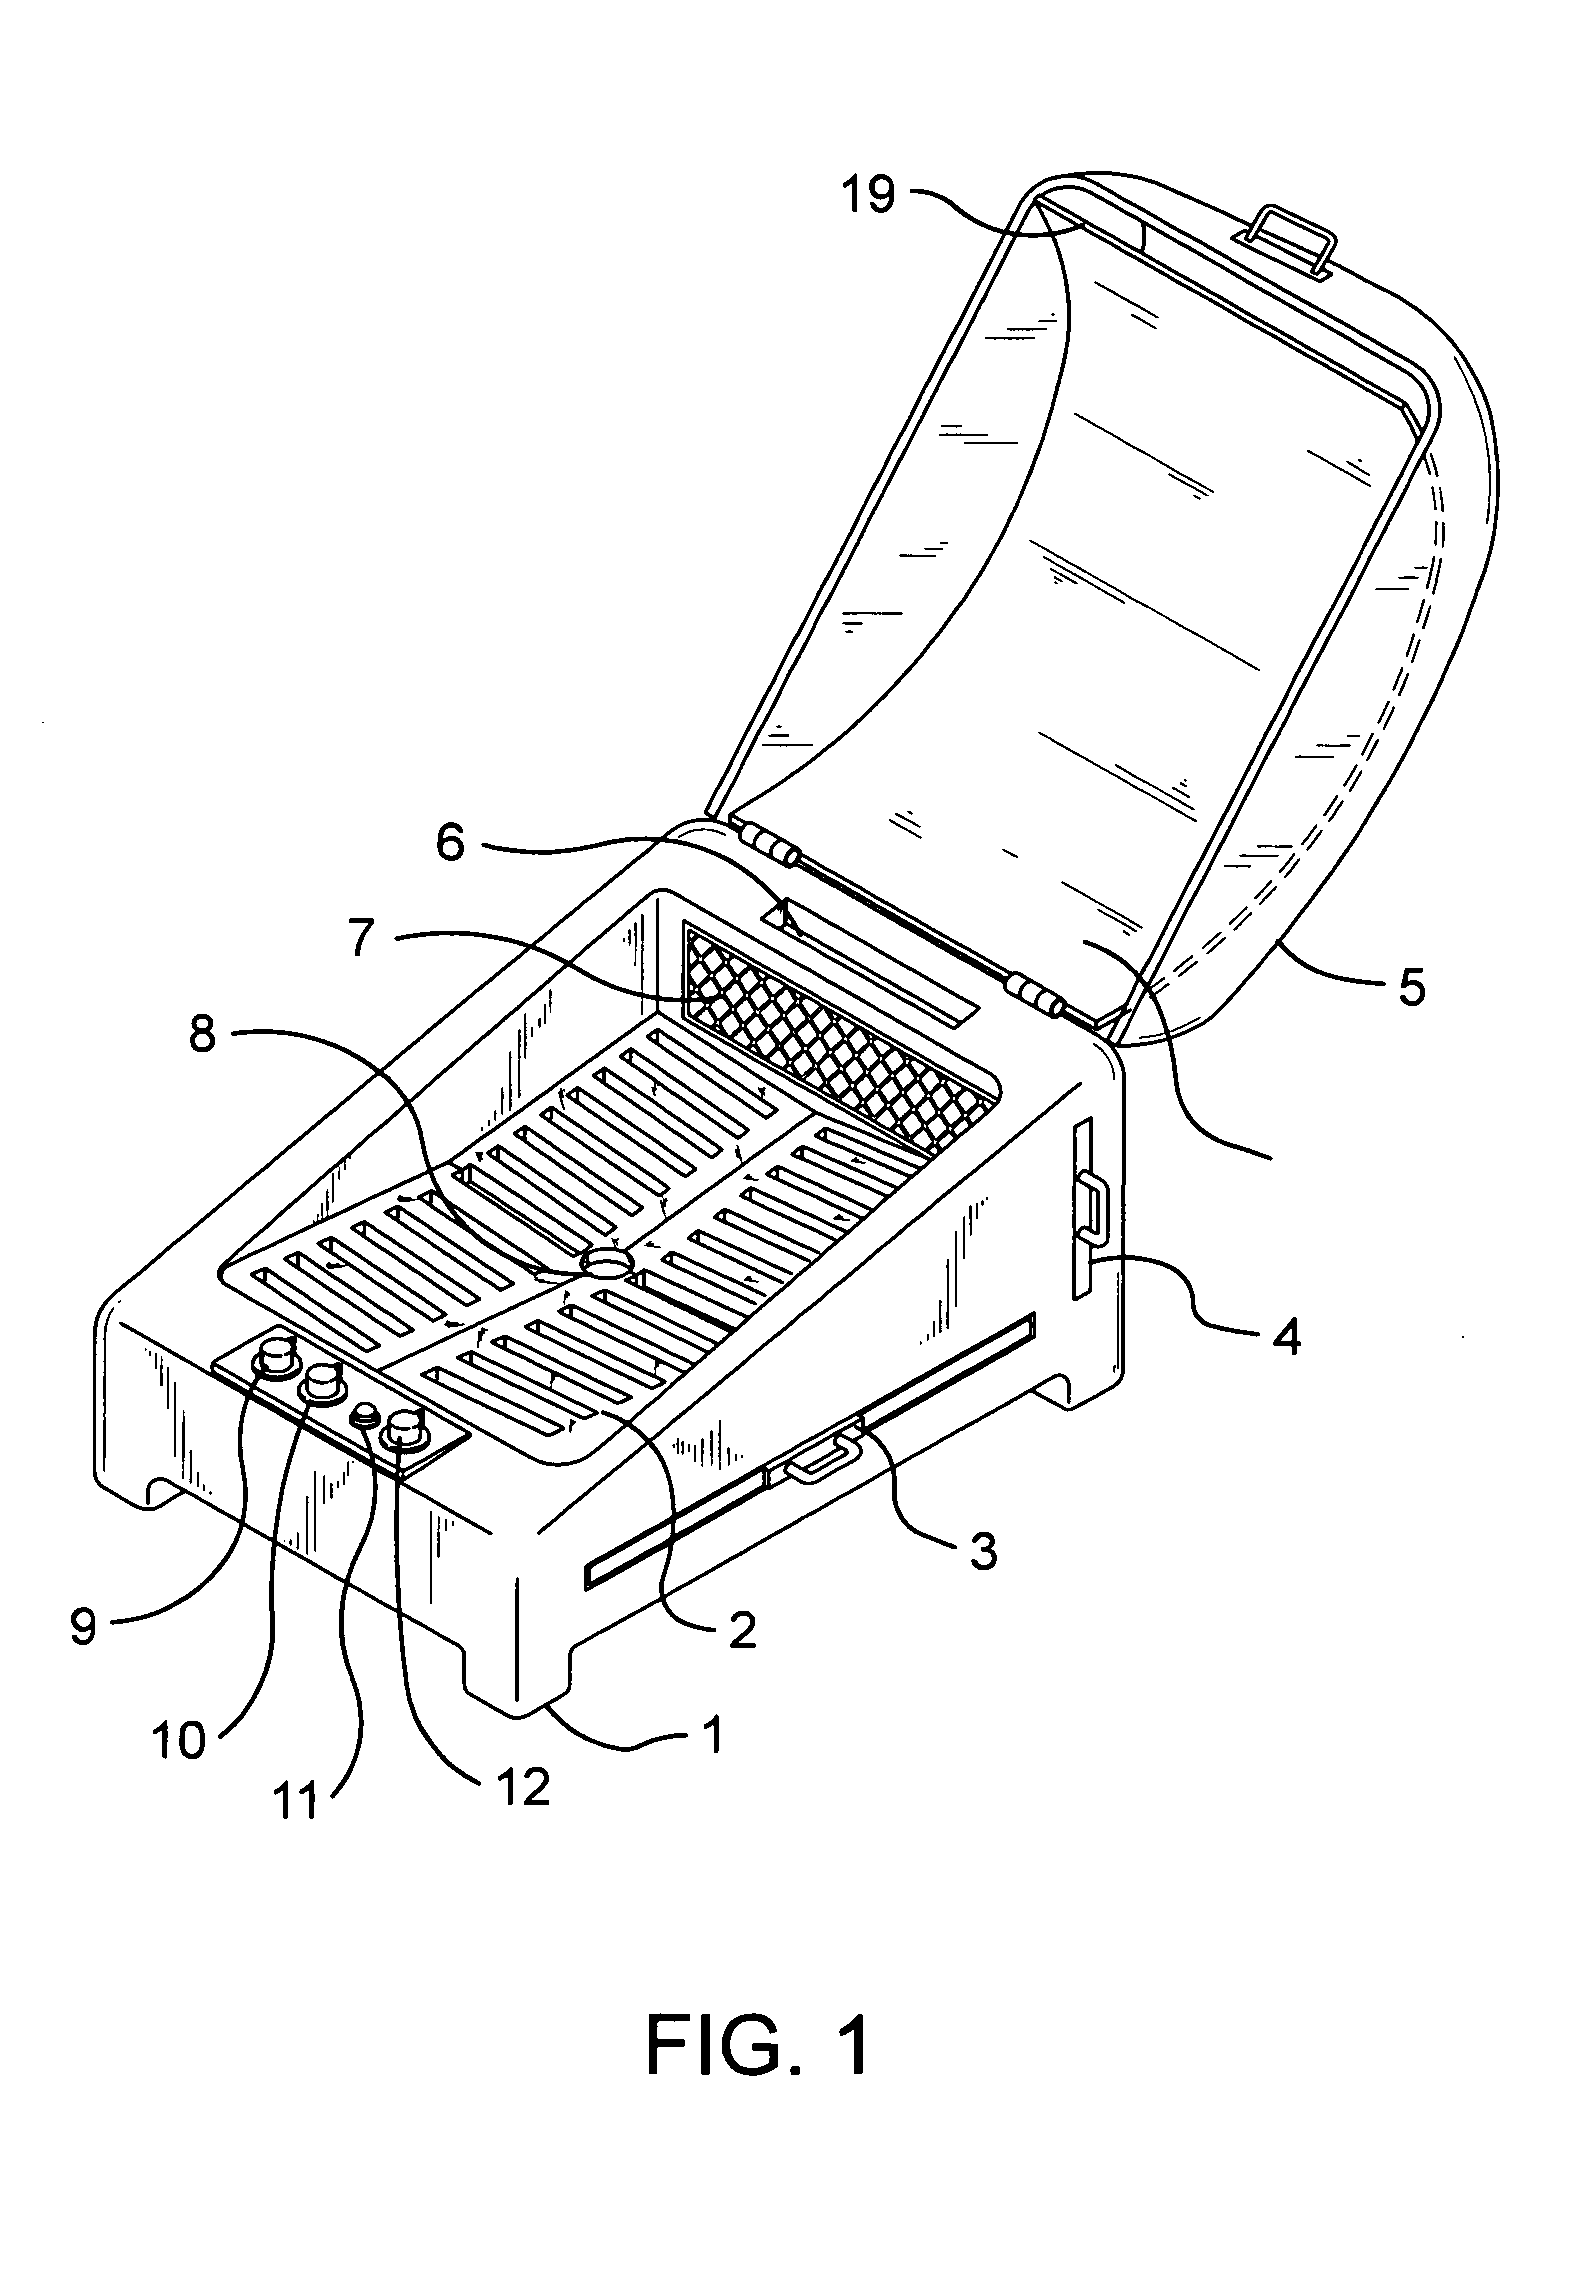 Convection grill